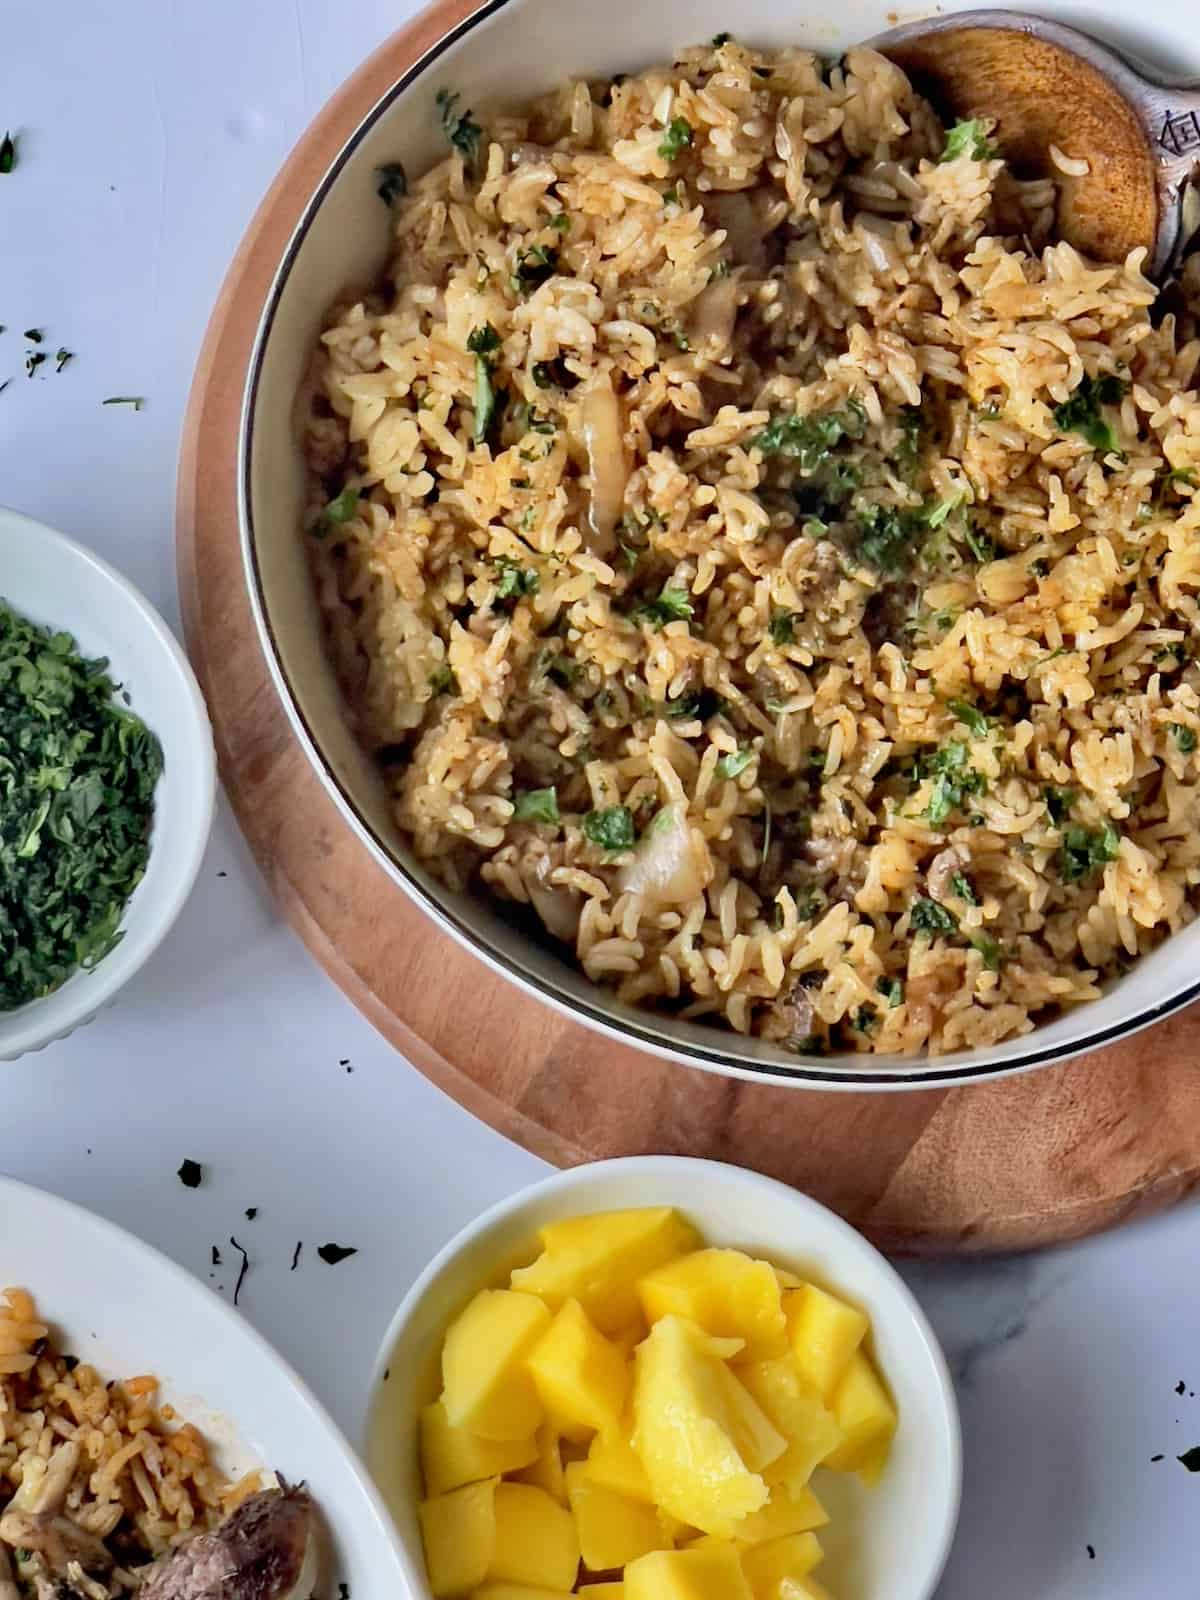 Caribbean rice with cilantro in a white bowl